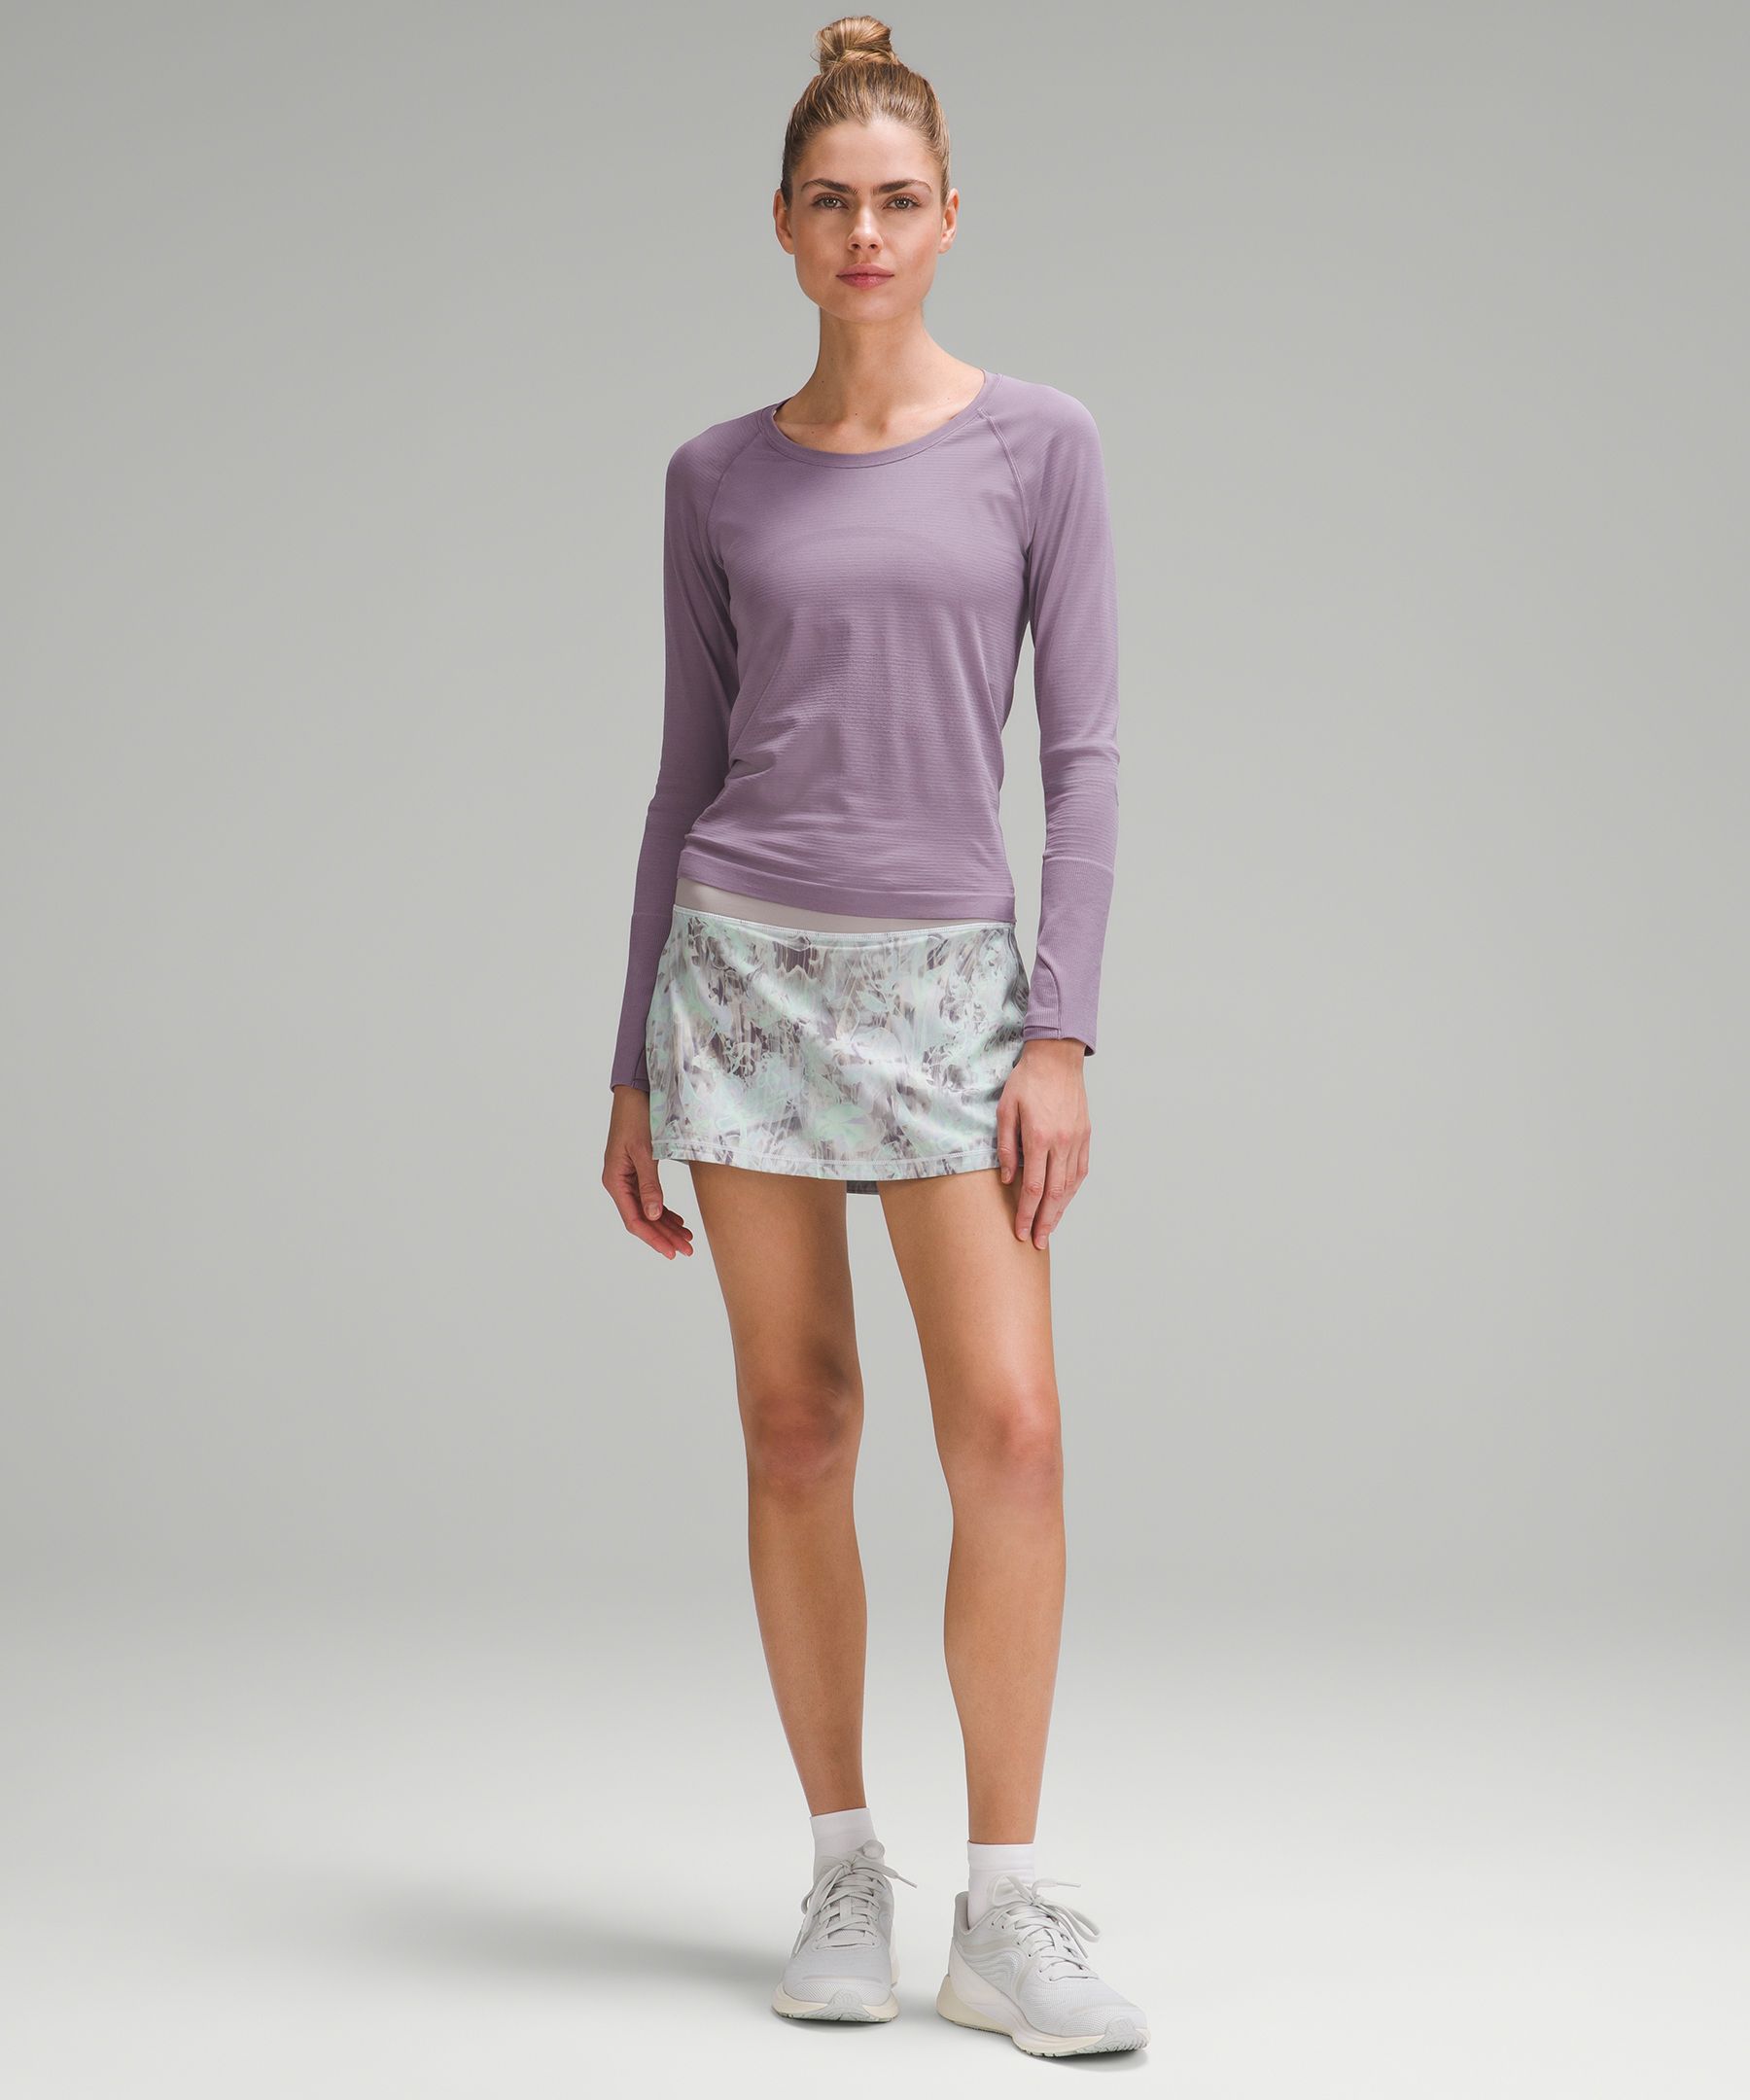 Lululemon Pace Rival Mid-Rise Skirt – The Shop at Equinox